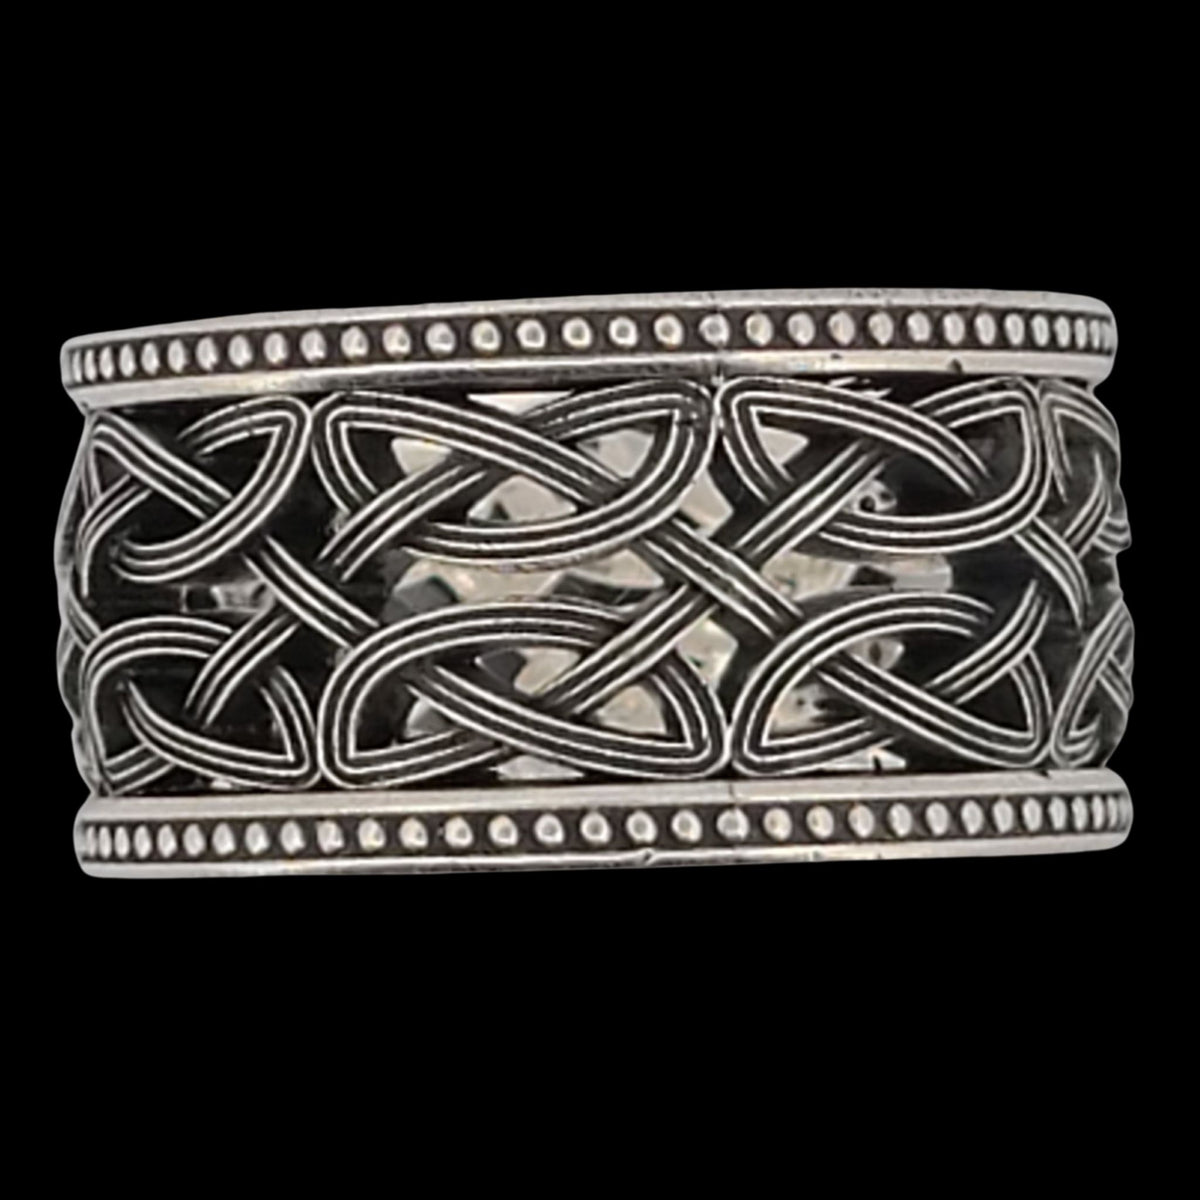 a silver ring with an intricate design